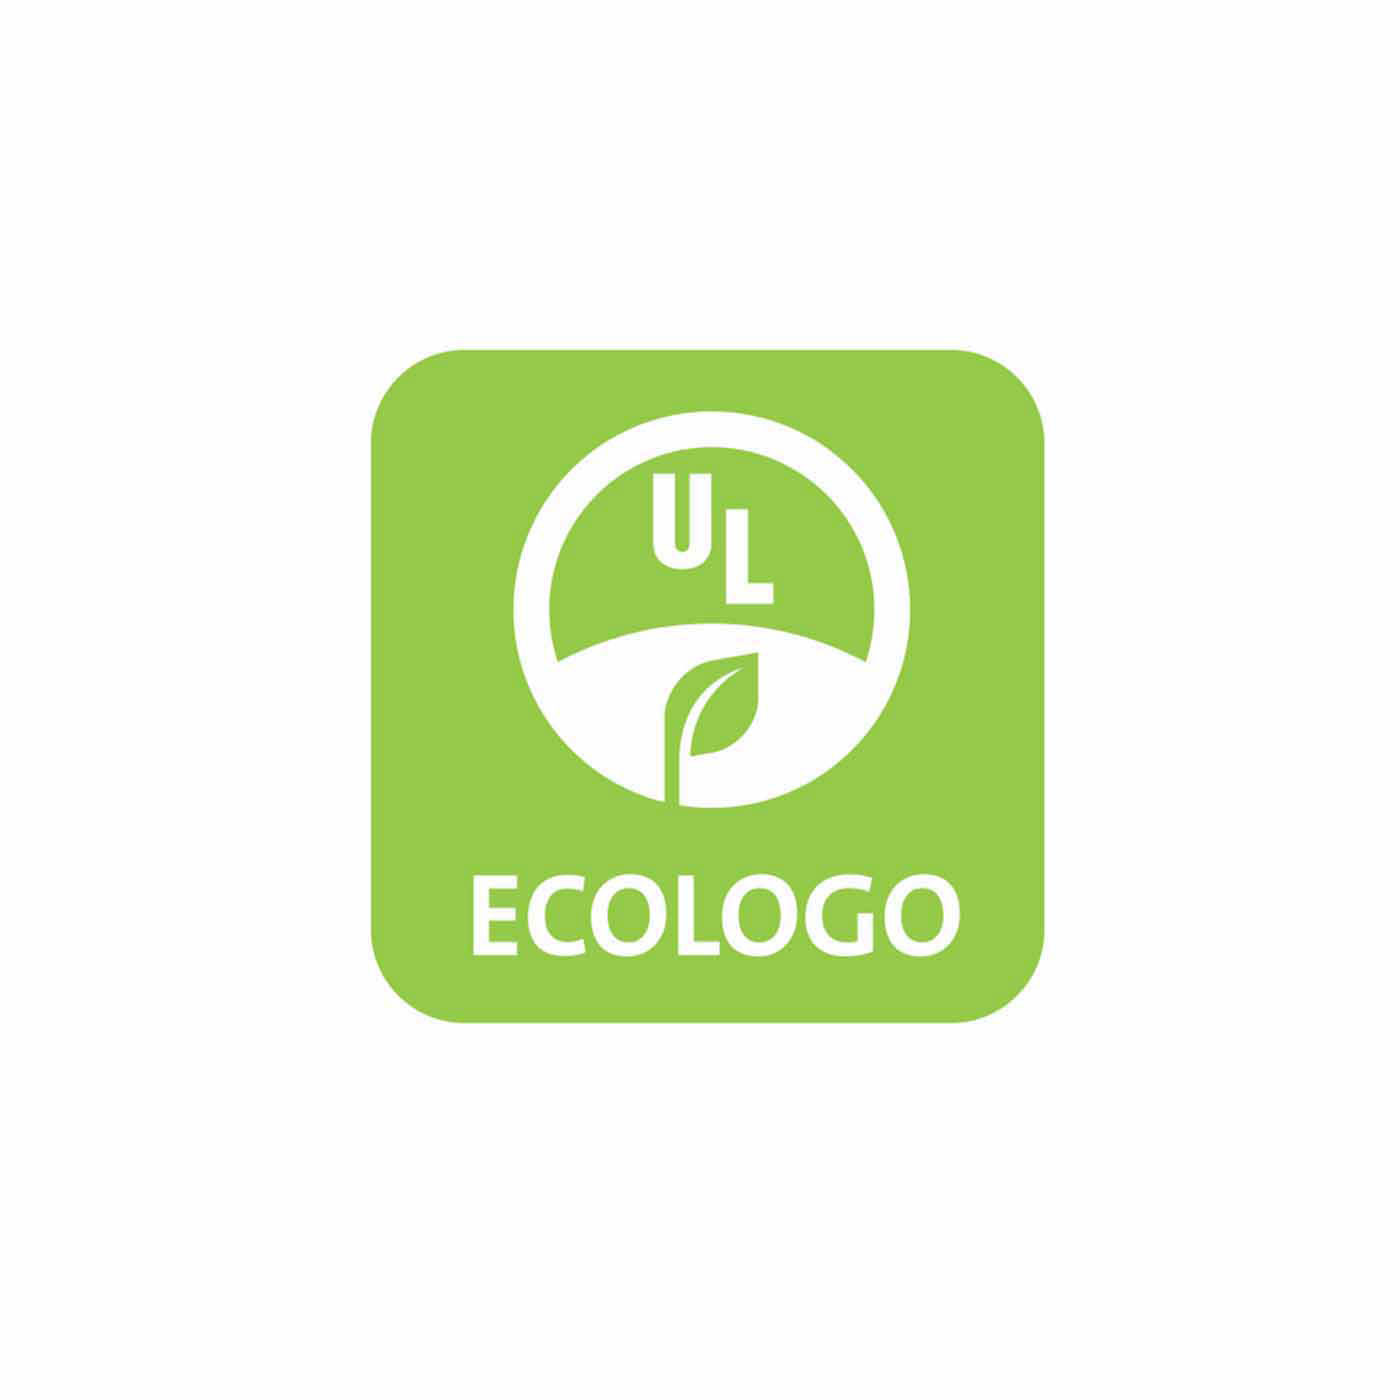 Purchasing-Cleaning and Janitorial Supplies-ECOLOGO: the Underwriters Laboratories ECOLOGO is a green square icon featuring a white and green circle in the middle that has the initials "UL" in it. At the bottom of this logo is the word "ECOLOGO" written in white.